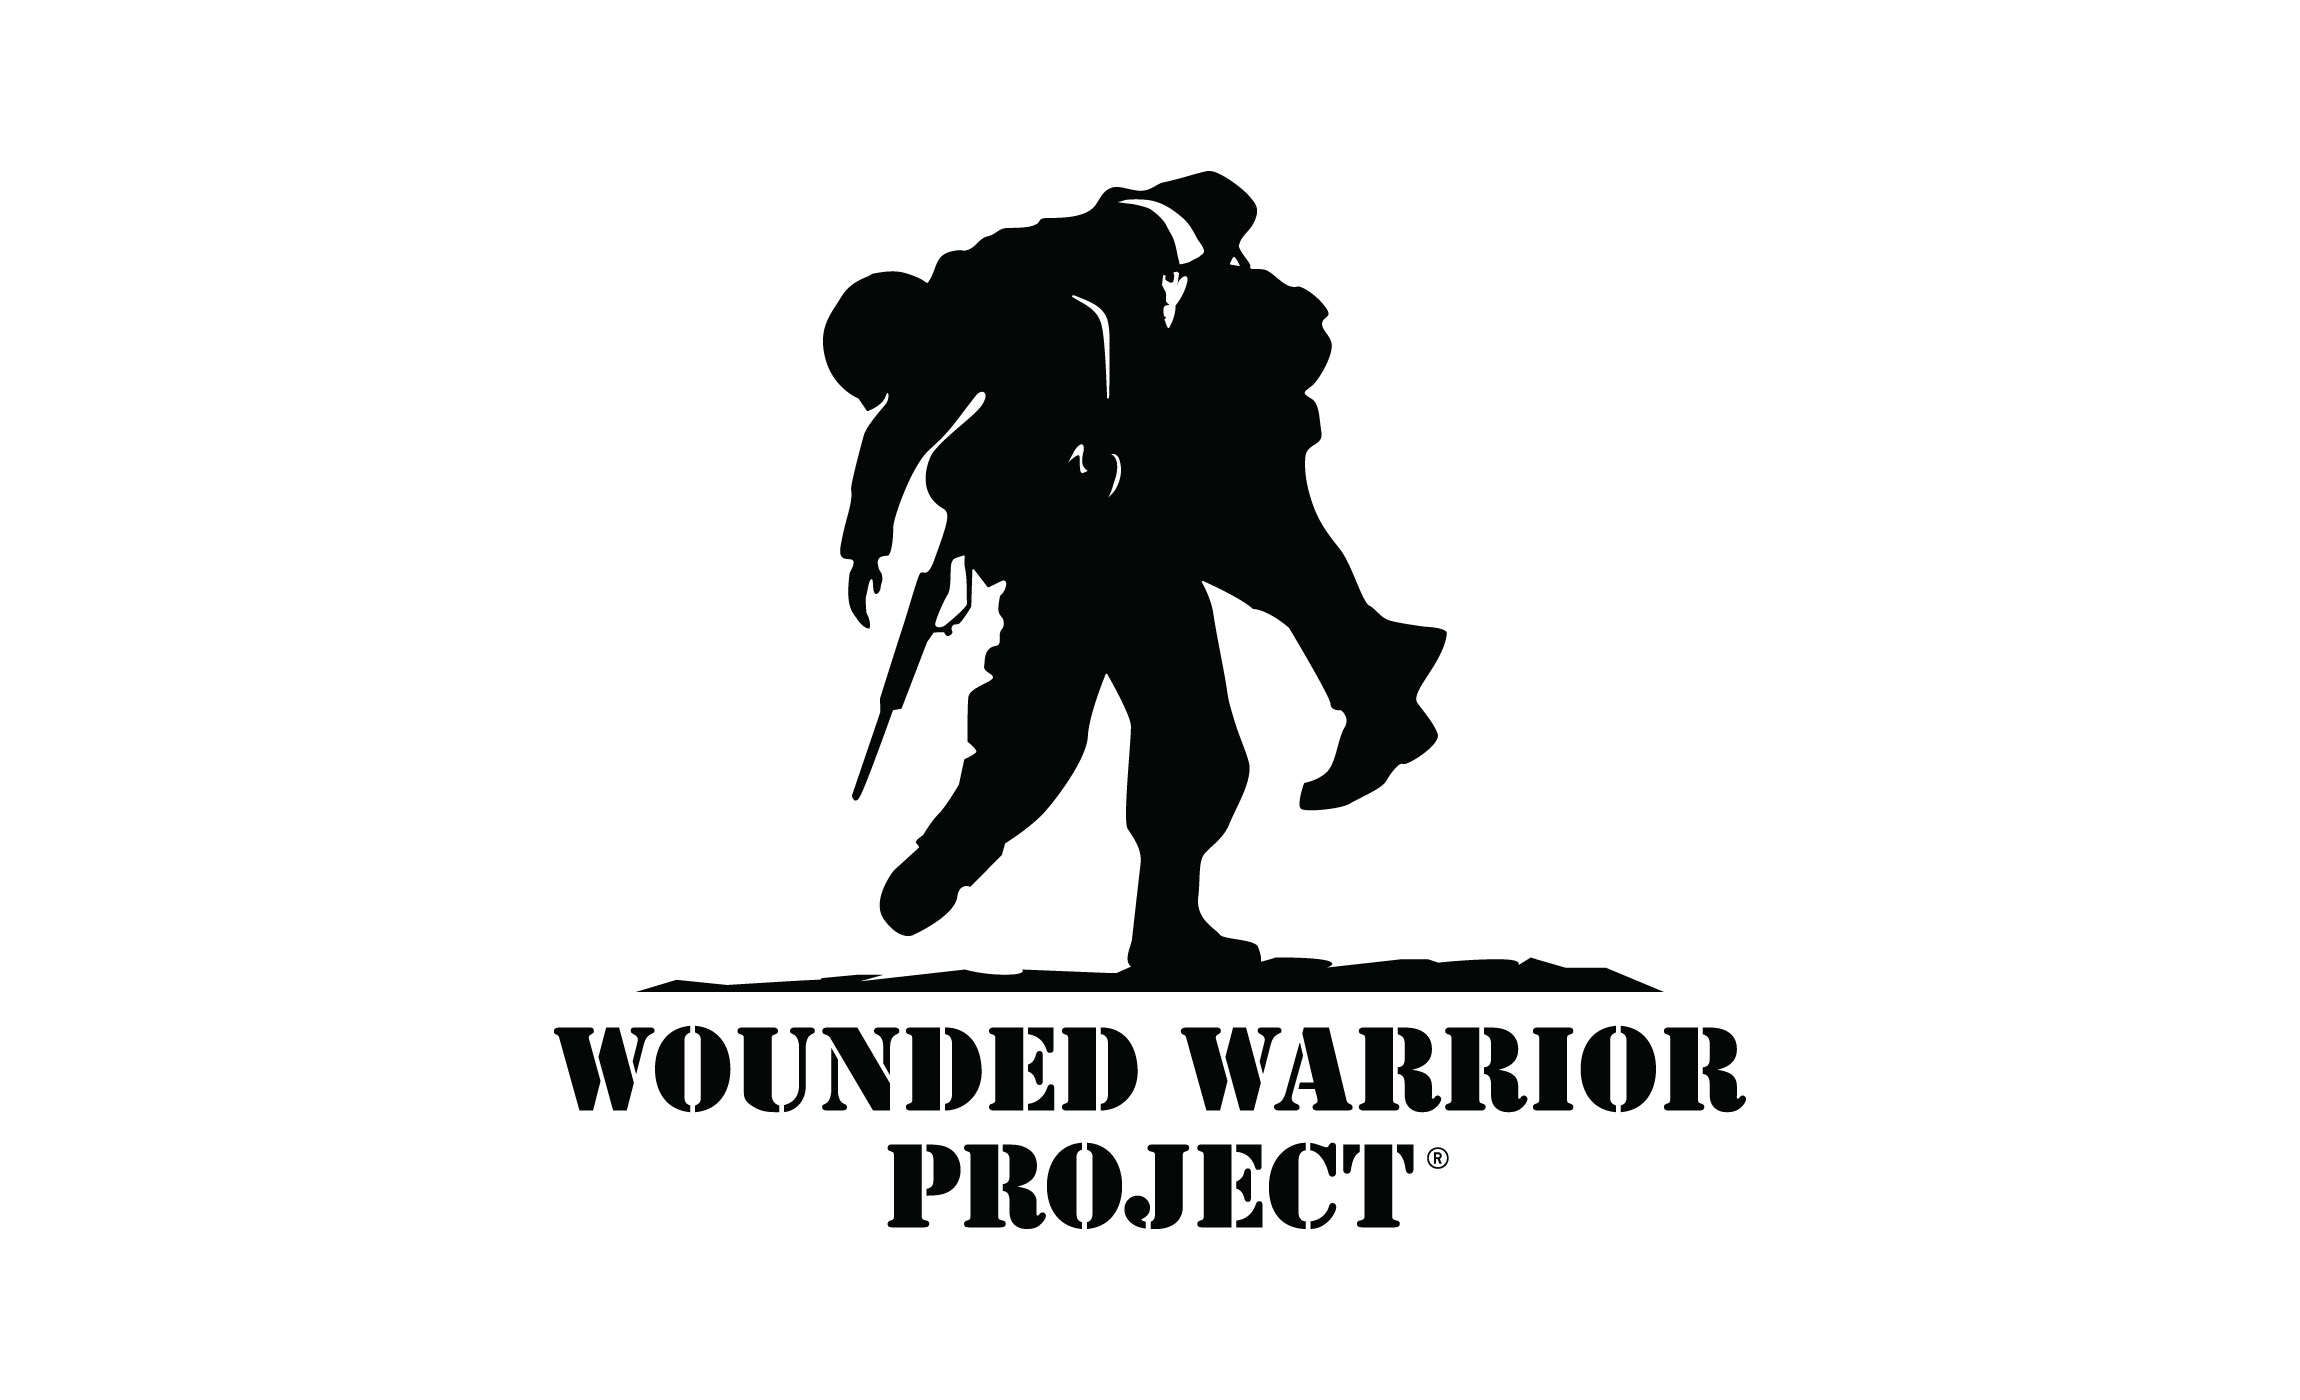 Wounded Warrior Project® (WWP) logo